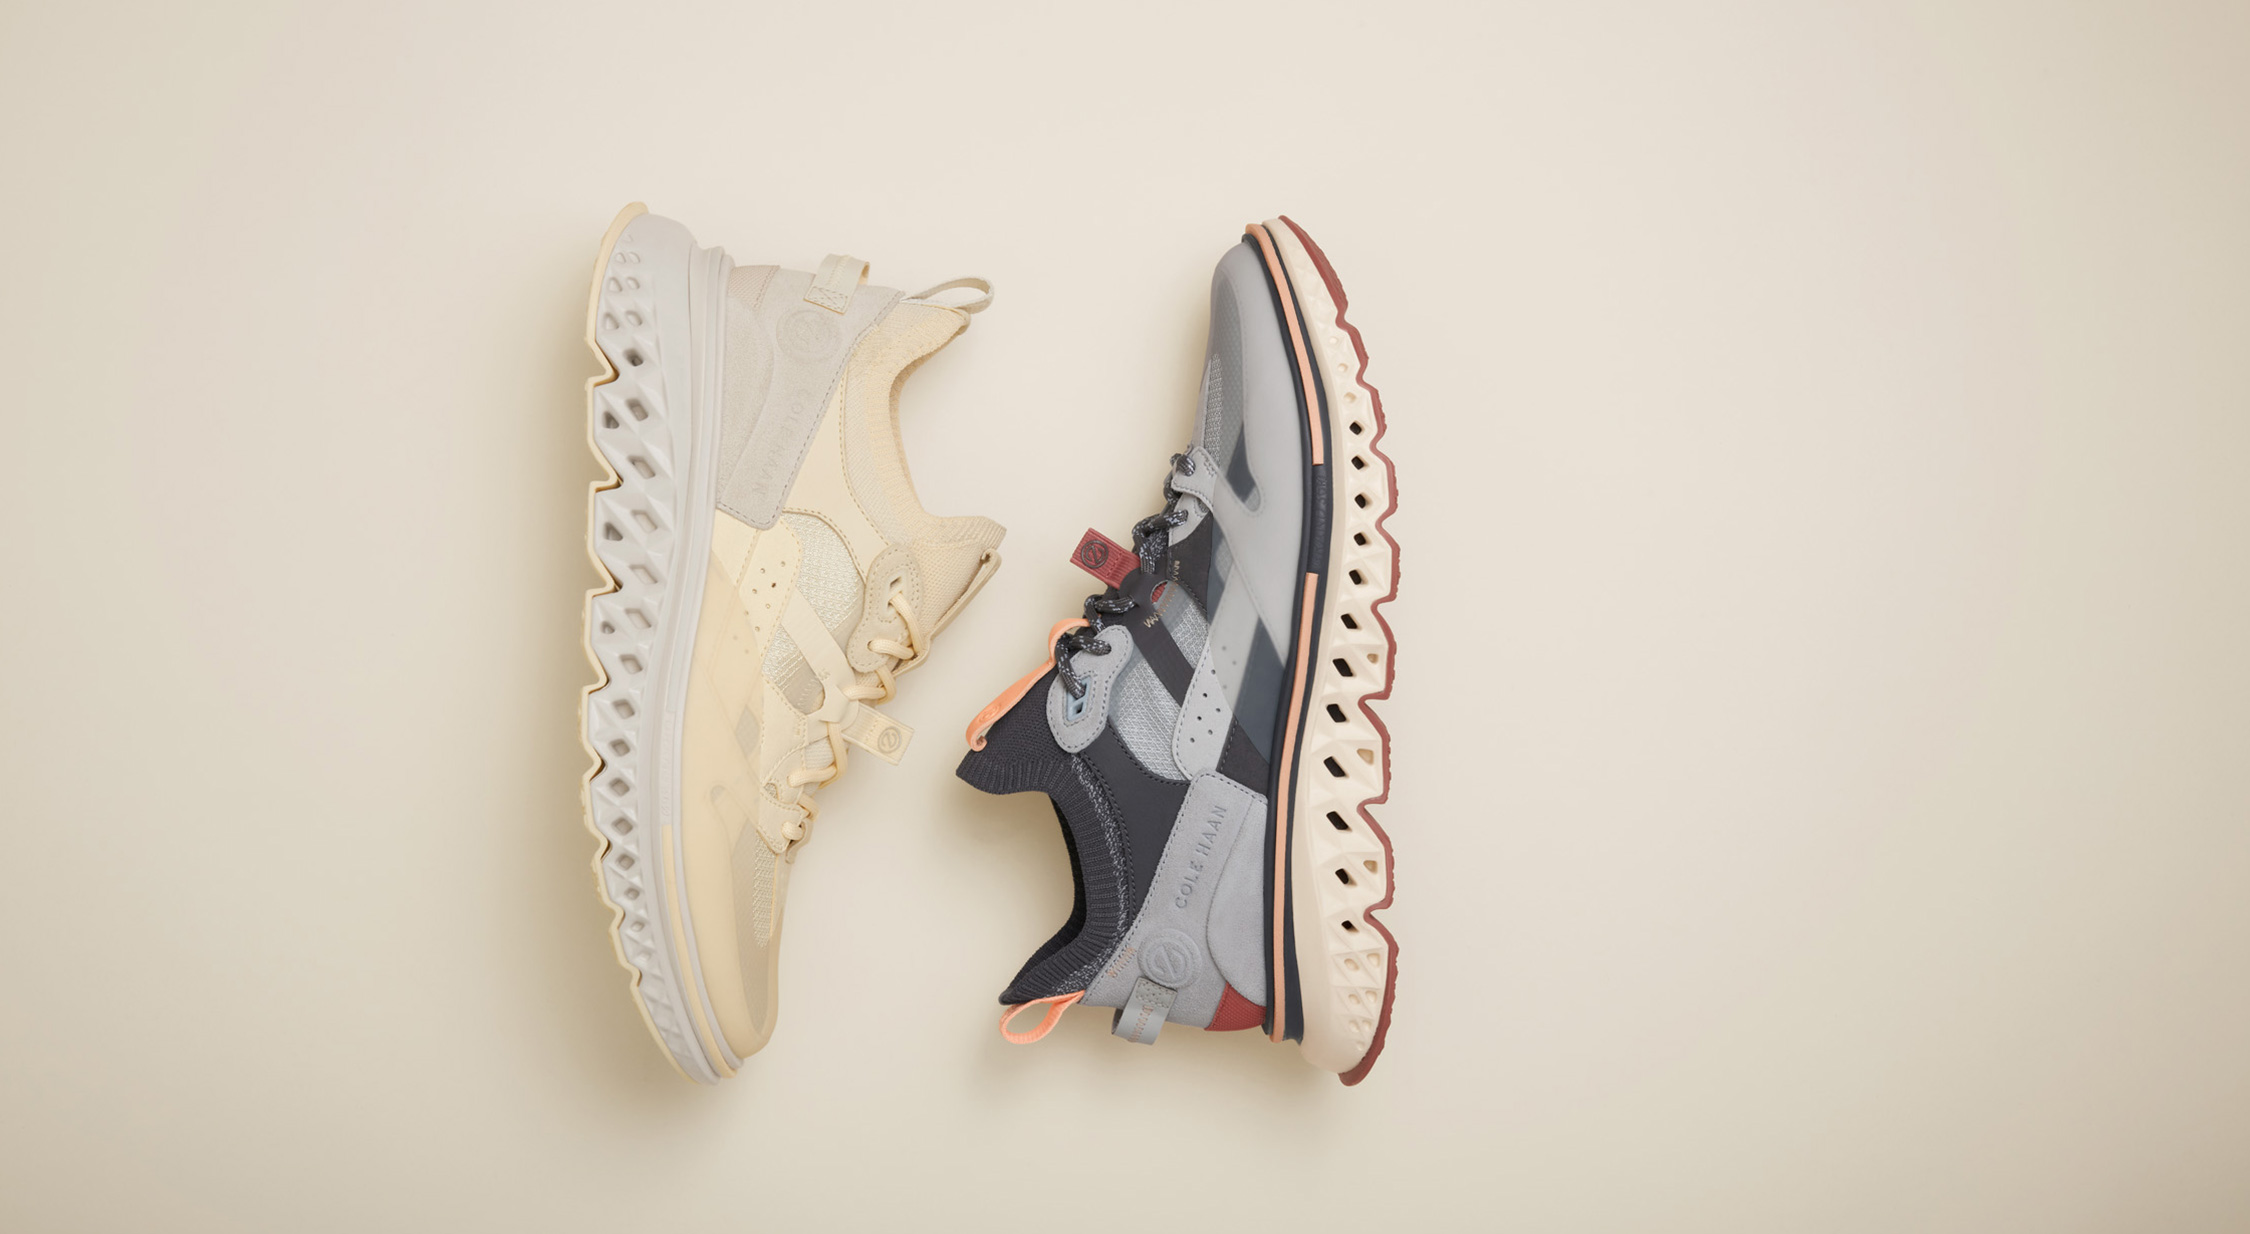 Cole Haan Defies Convention Again With the Launch of the 5.ZERØGRAND WRK Sneaker